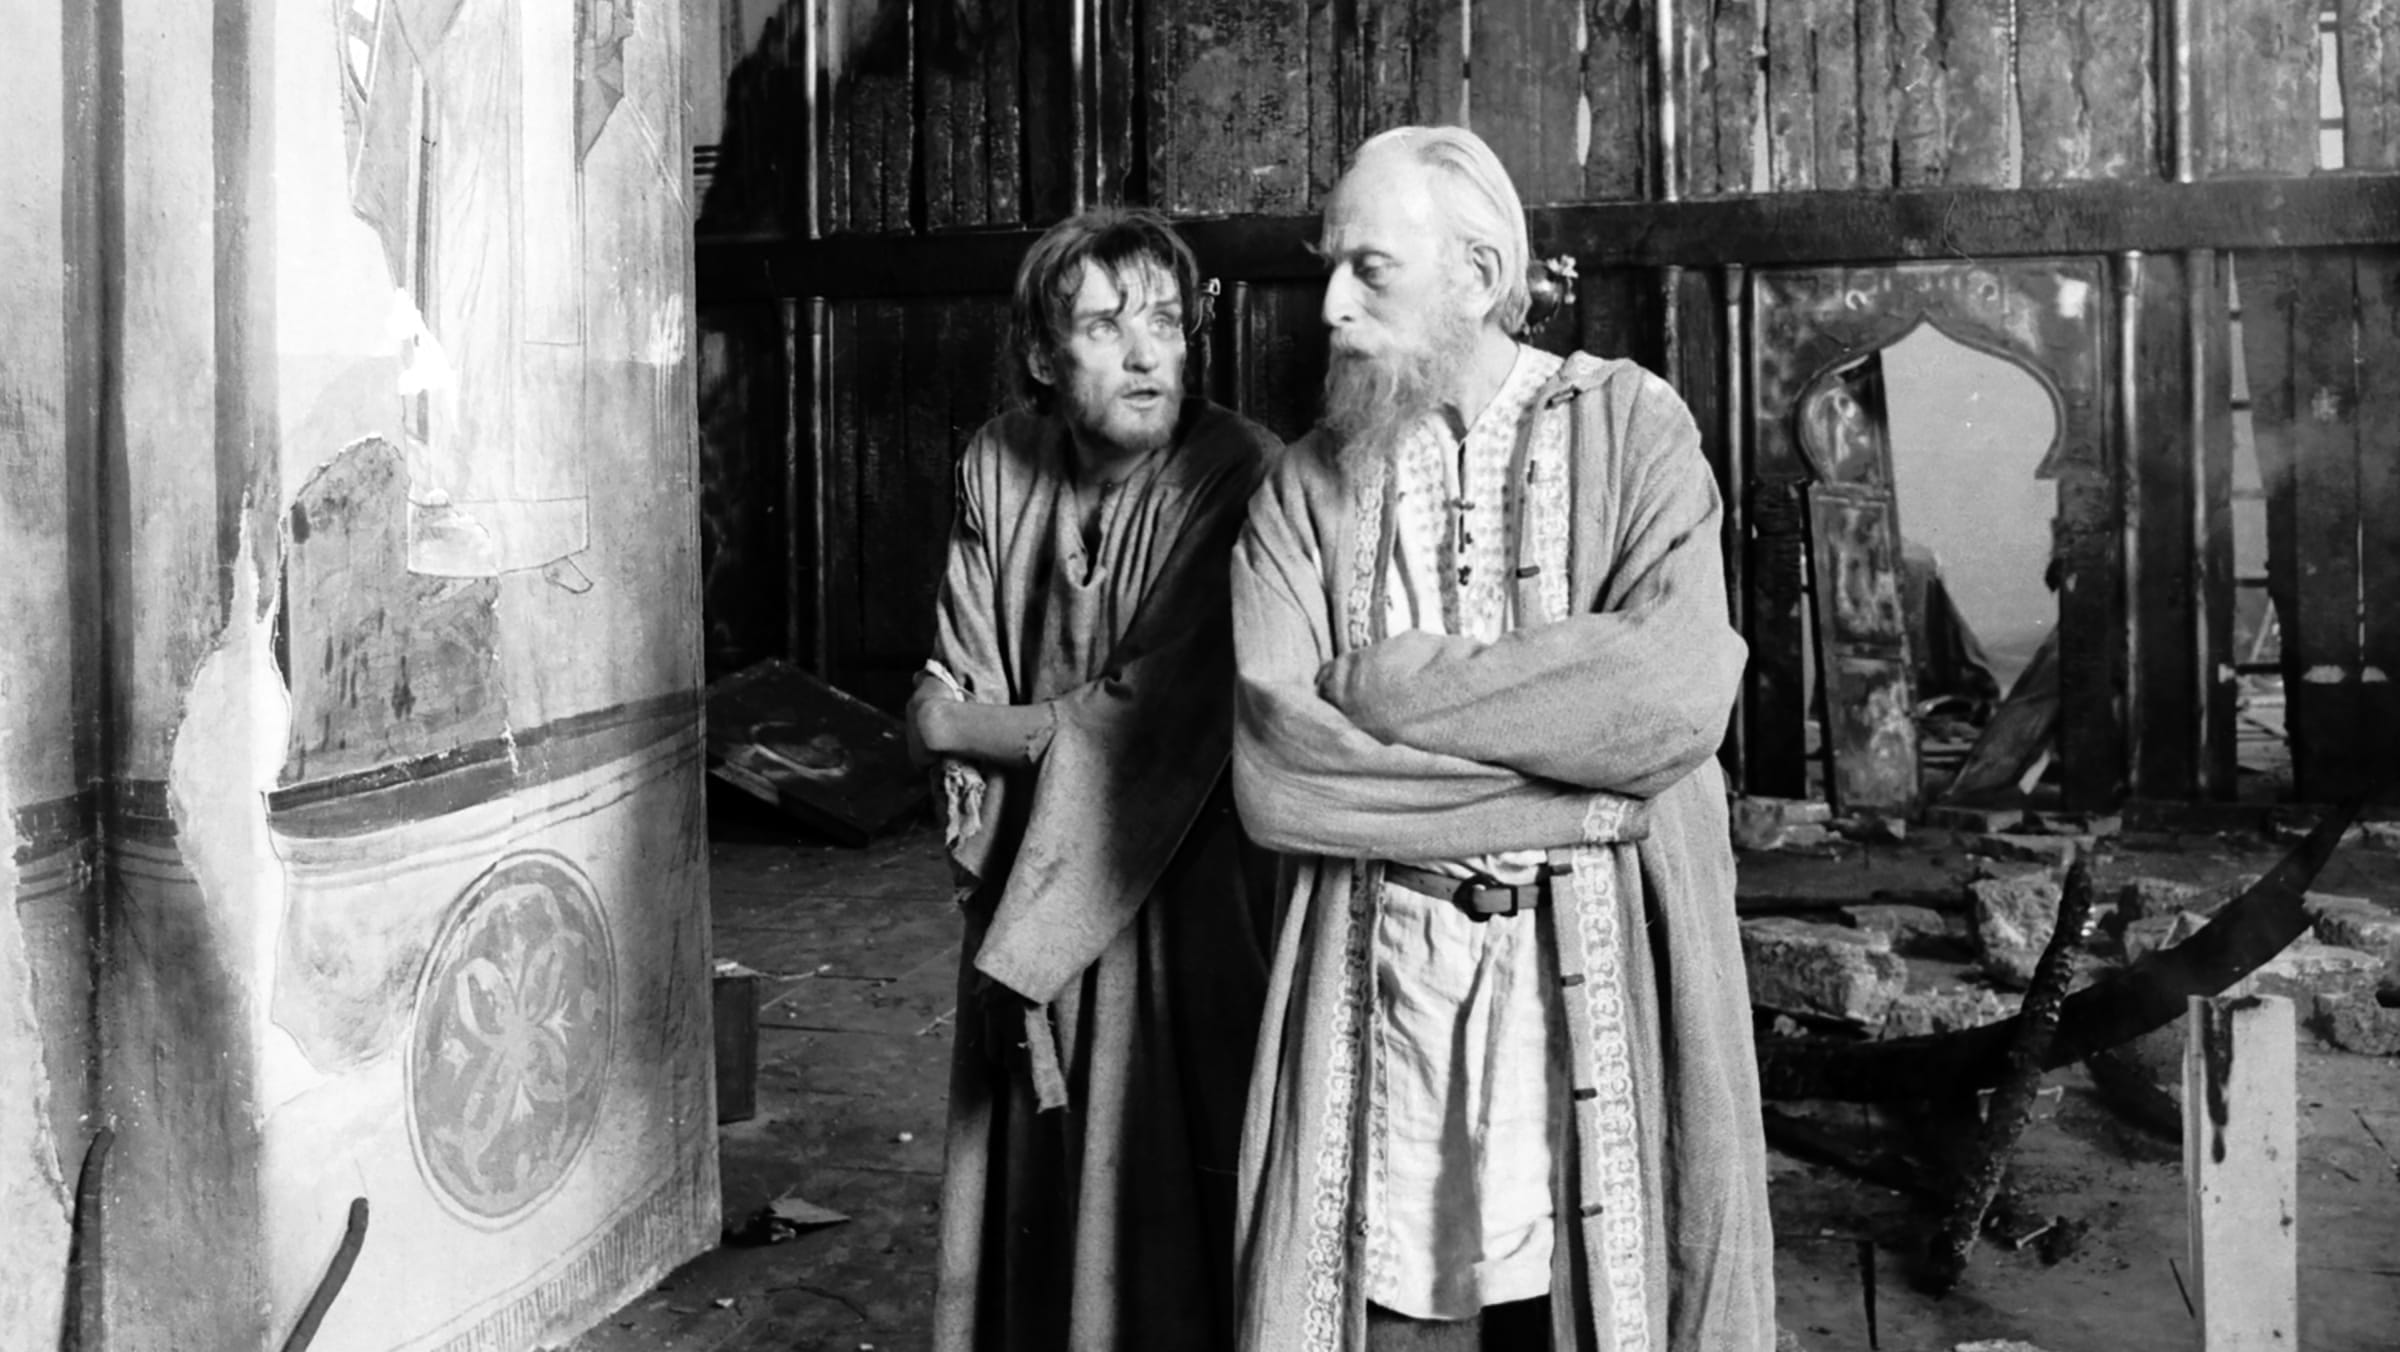 Andrei Rublev: An Icon Emerges. The Current. The Criterion